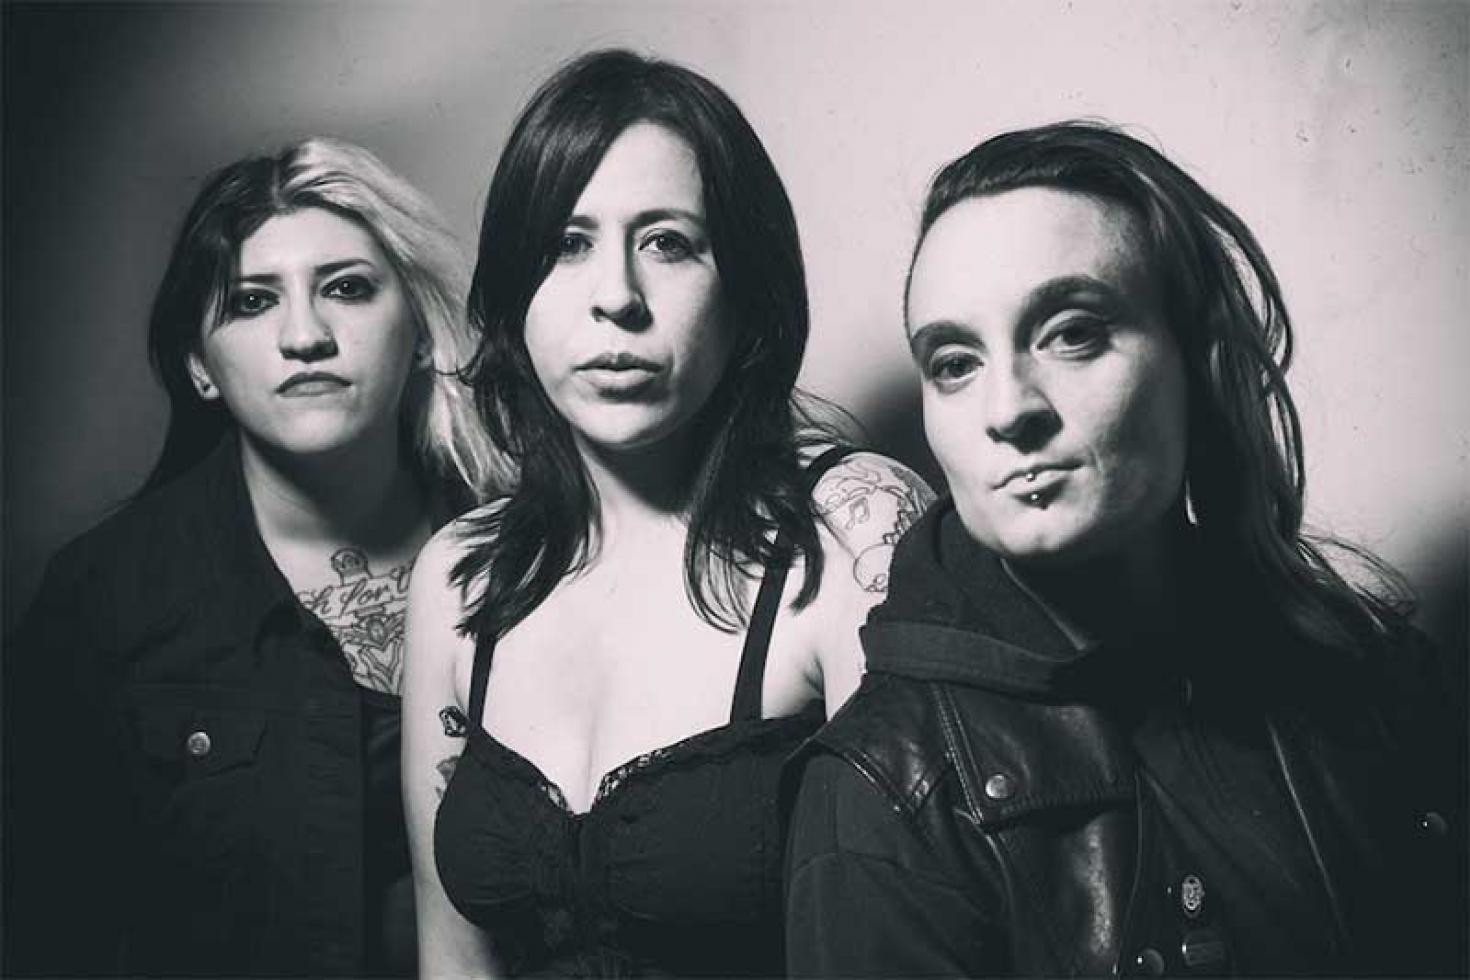 The Venomous Pinks pay homage to 'Carrie' in new video for single 'I Really Don't Care'